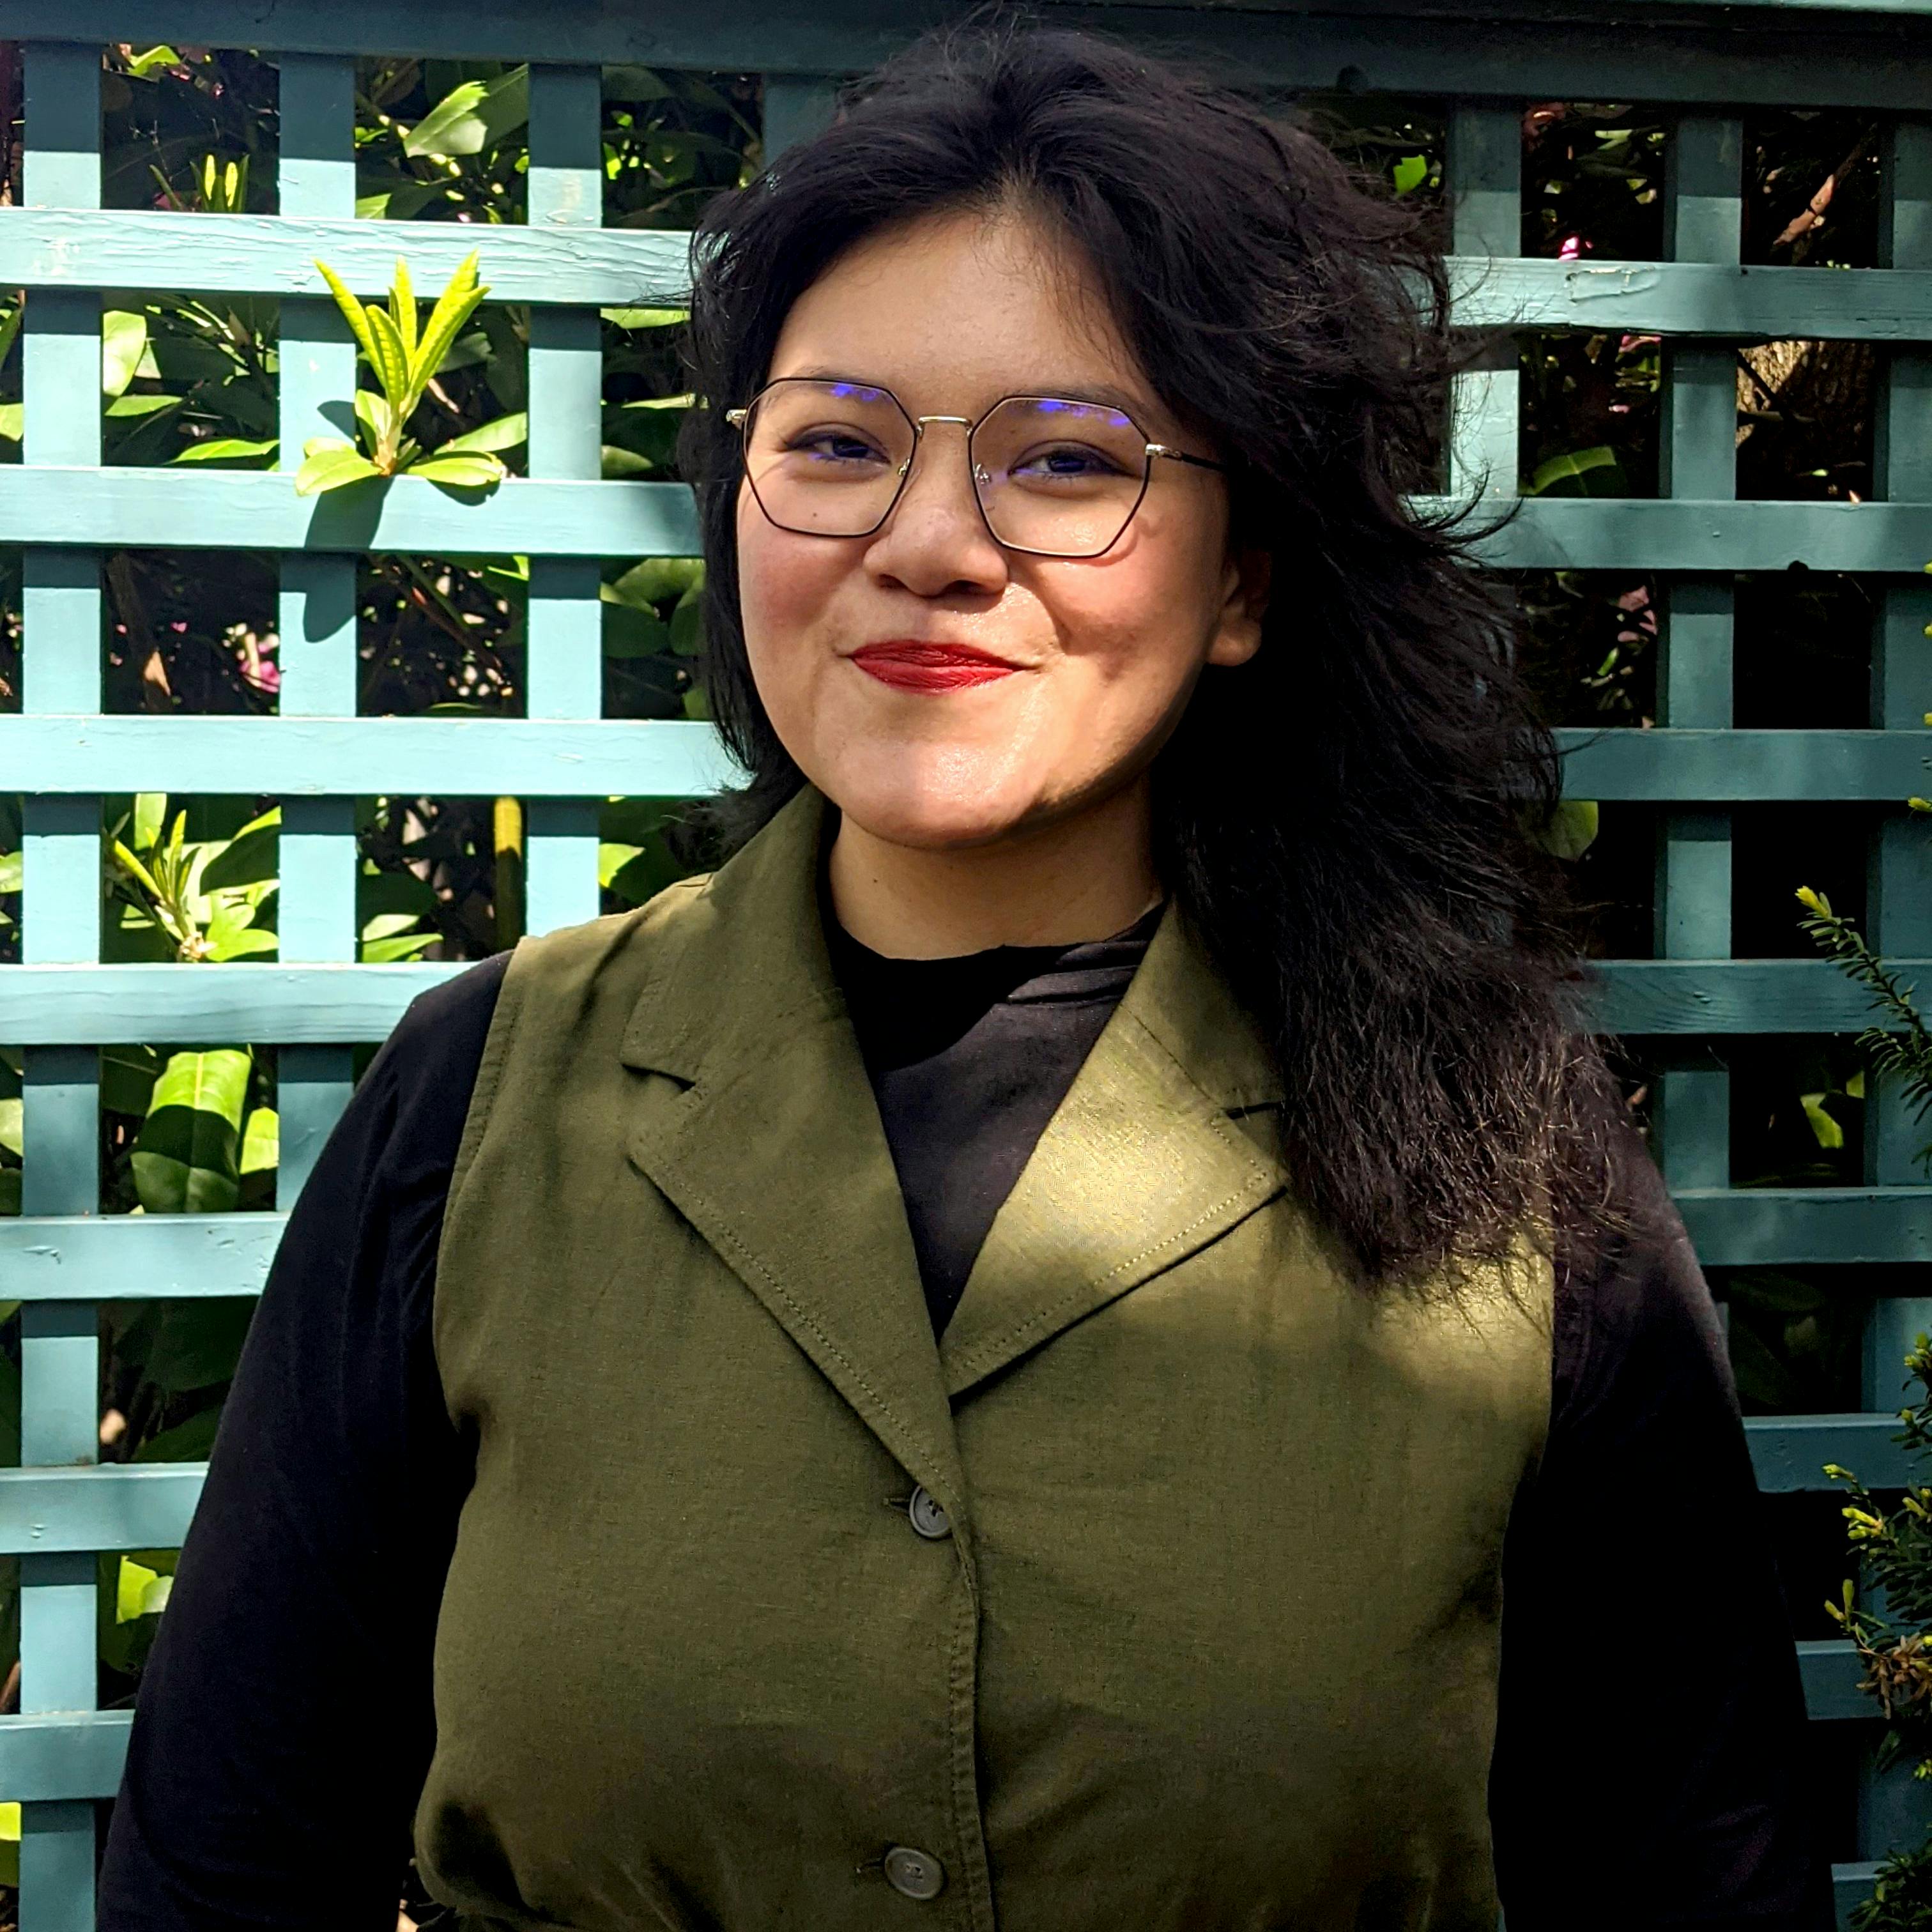 A portrait of Faune Ybarra. Faune is smiling, wearing a green vest and glasses. Behind her is a blue lattice with green plants peeking through.